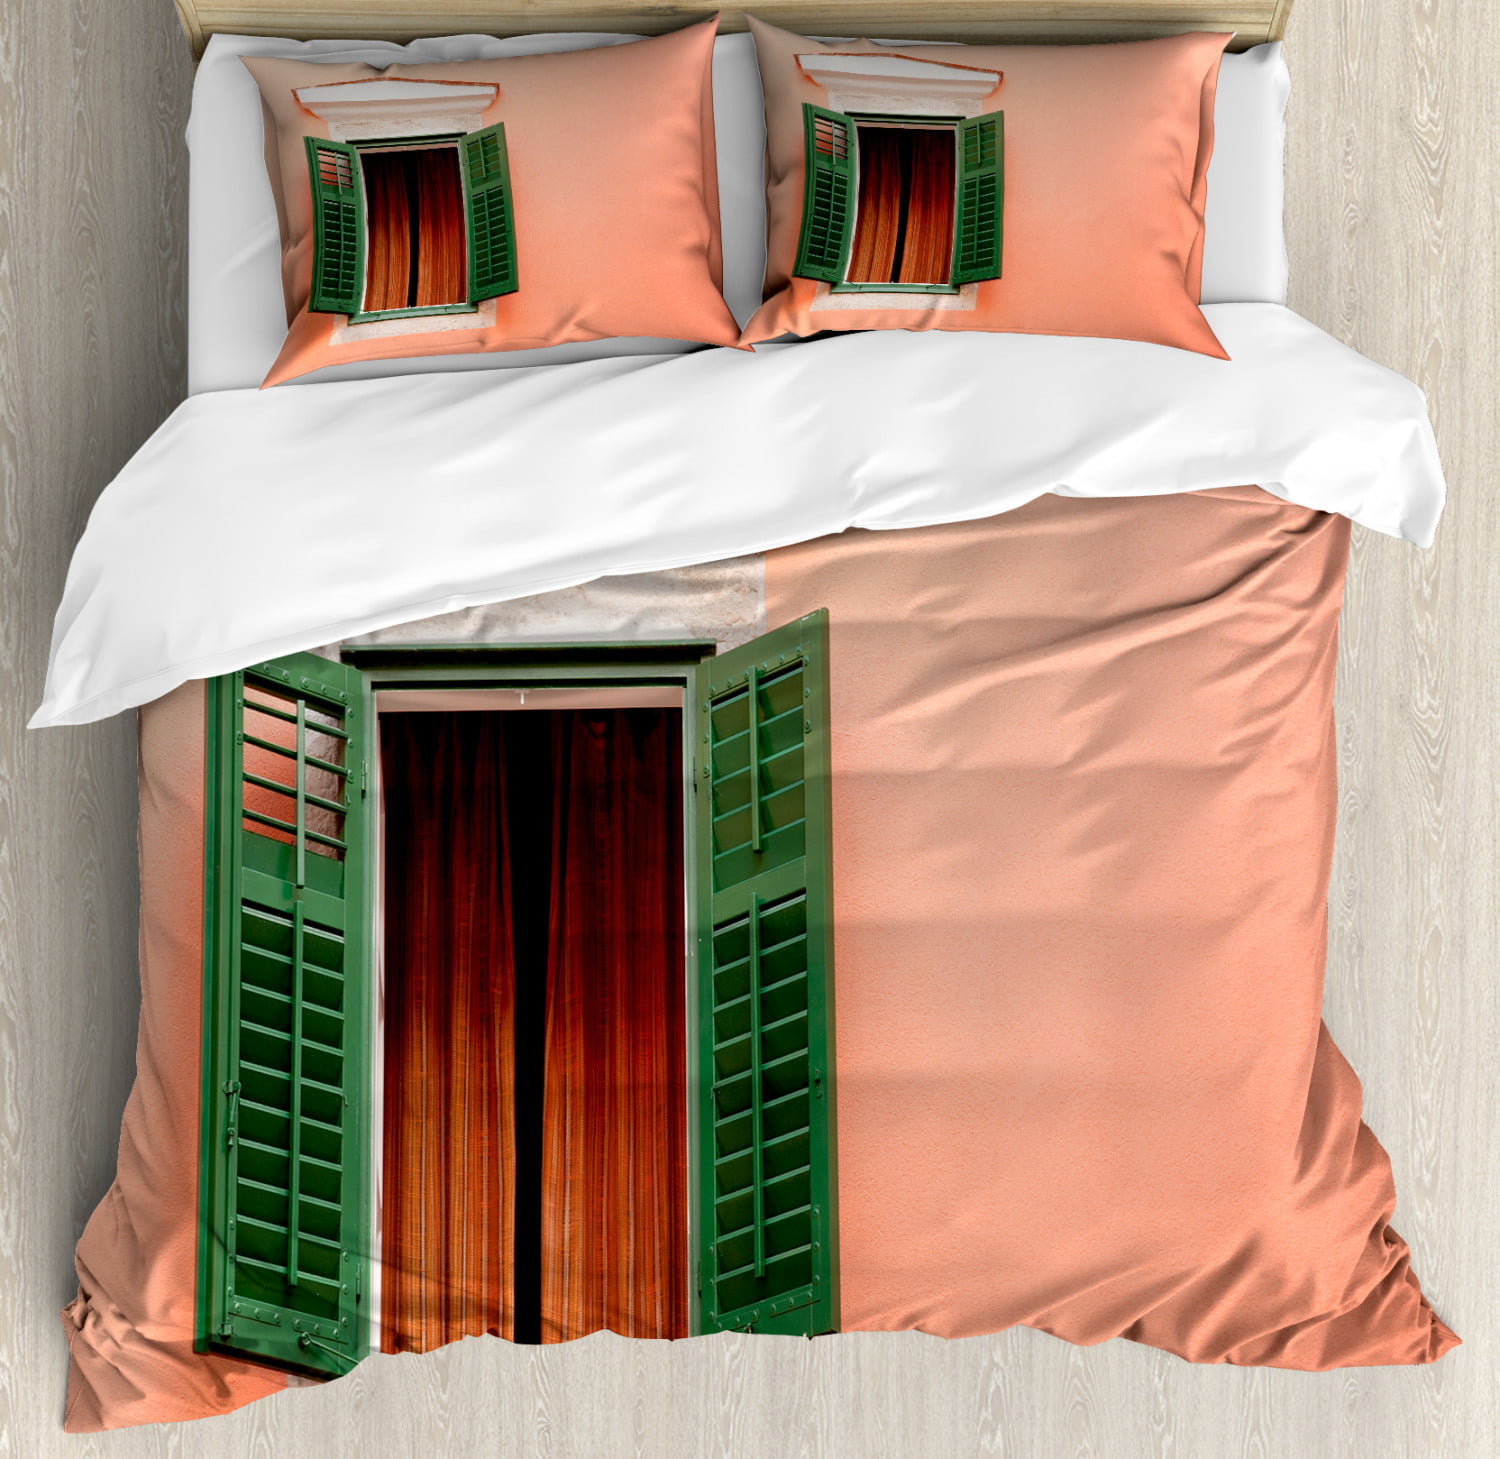 Country Duvet Cover Set Mediterranean Style Image Of Window And